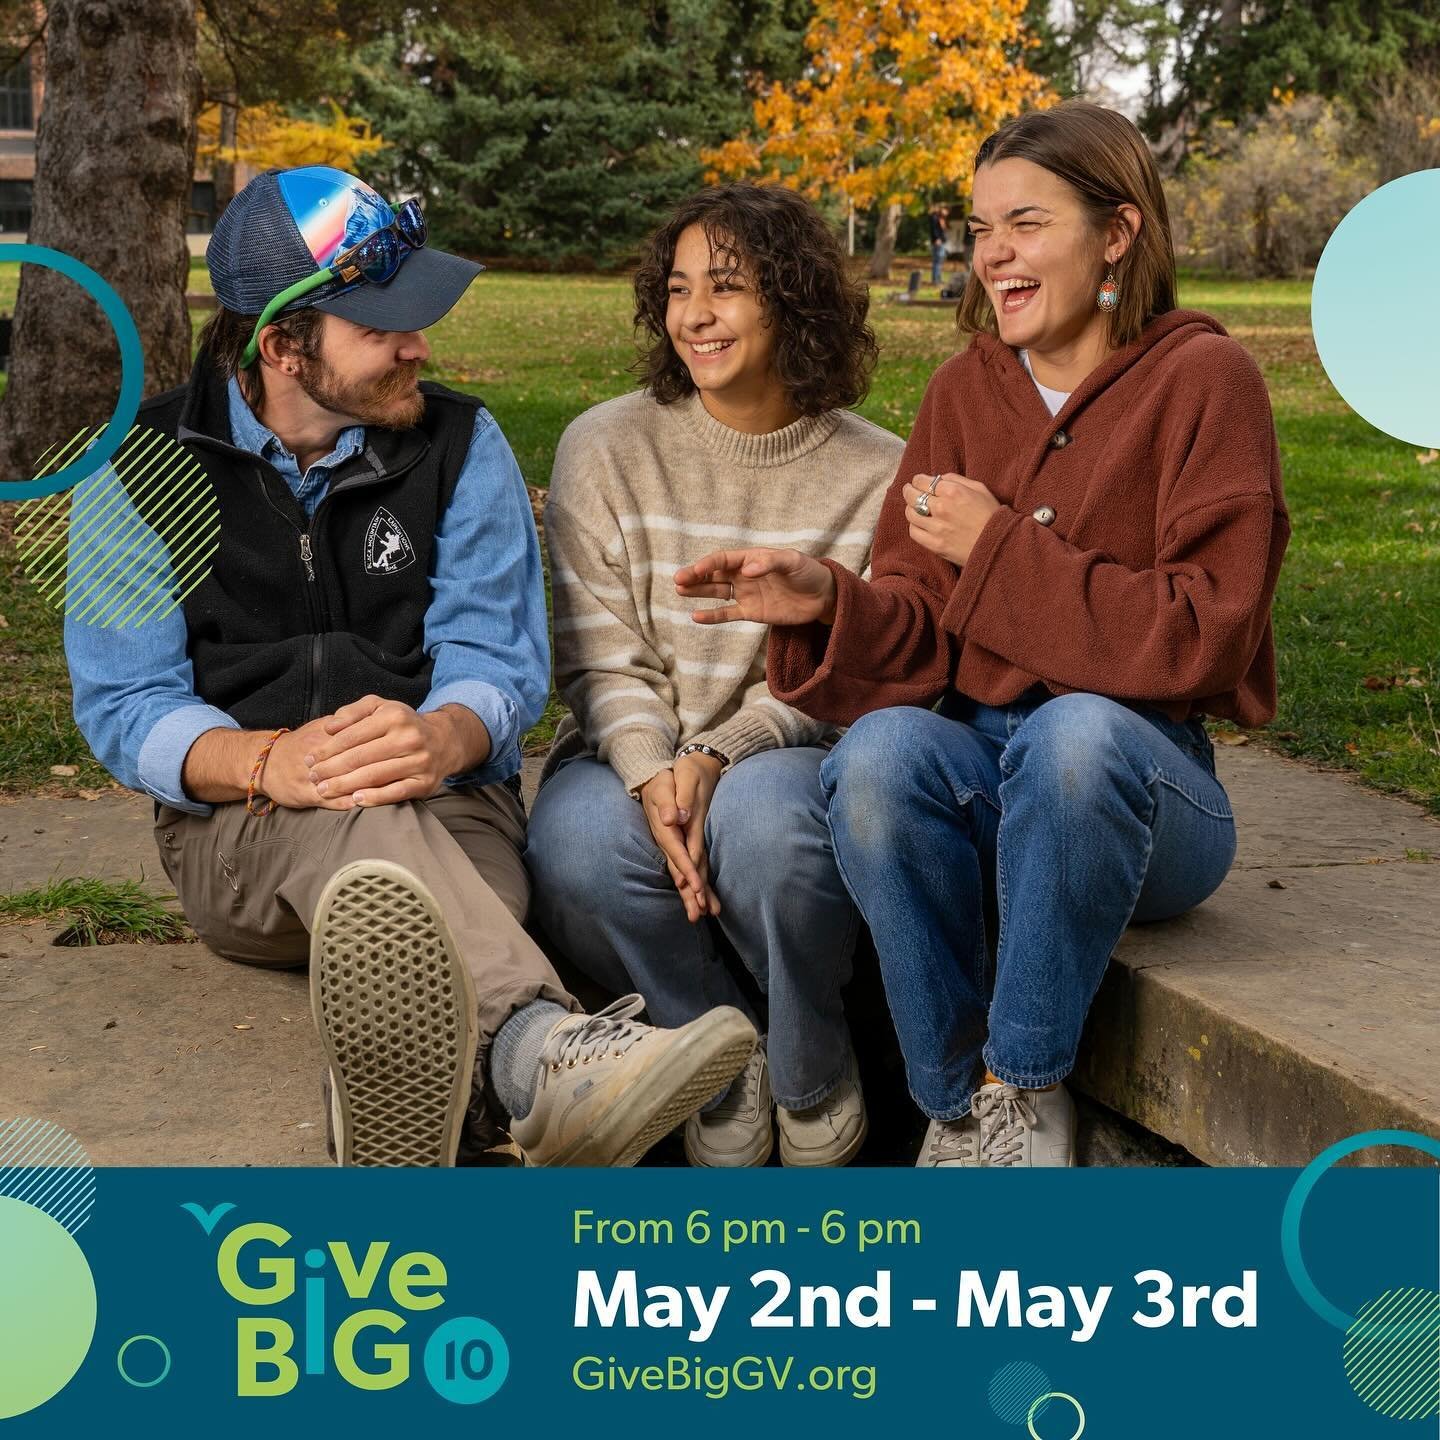 💚 @givebiggv starts tomorrow! Give Big is a 24-hour giving event with over 260 participating nonprofits. 💚

We are beyond grateful to be part of such a generous community that shows up for so many important causes, each of which contributes to maki